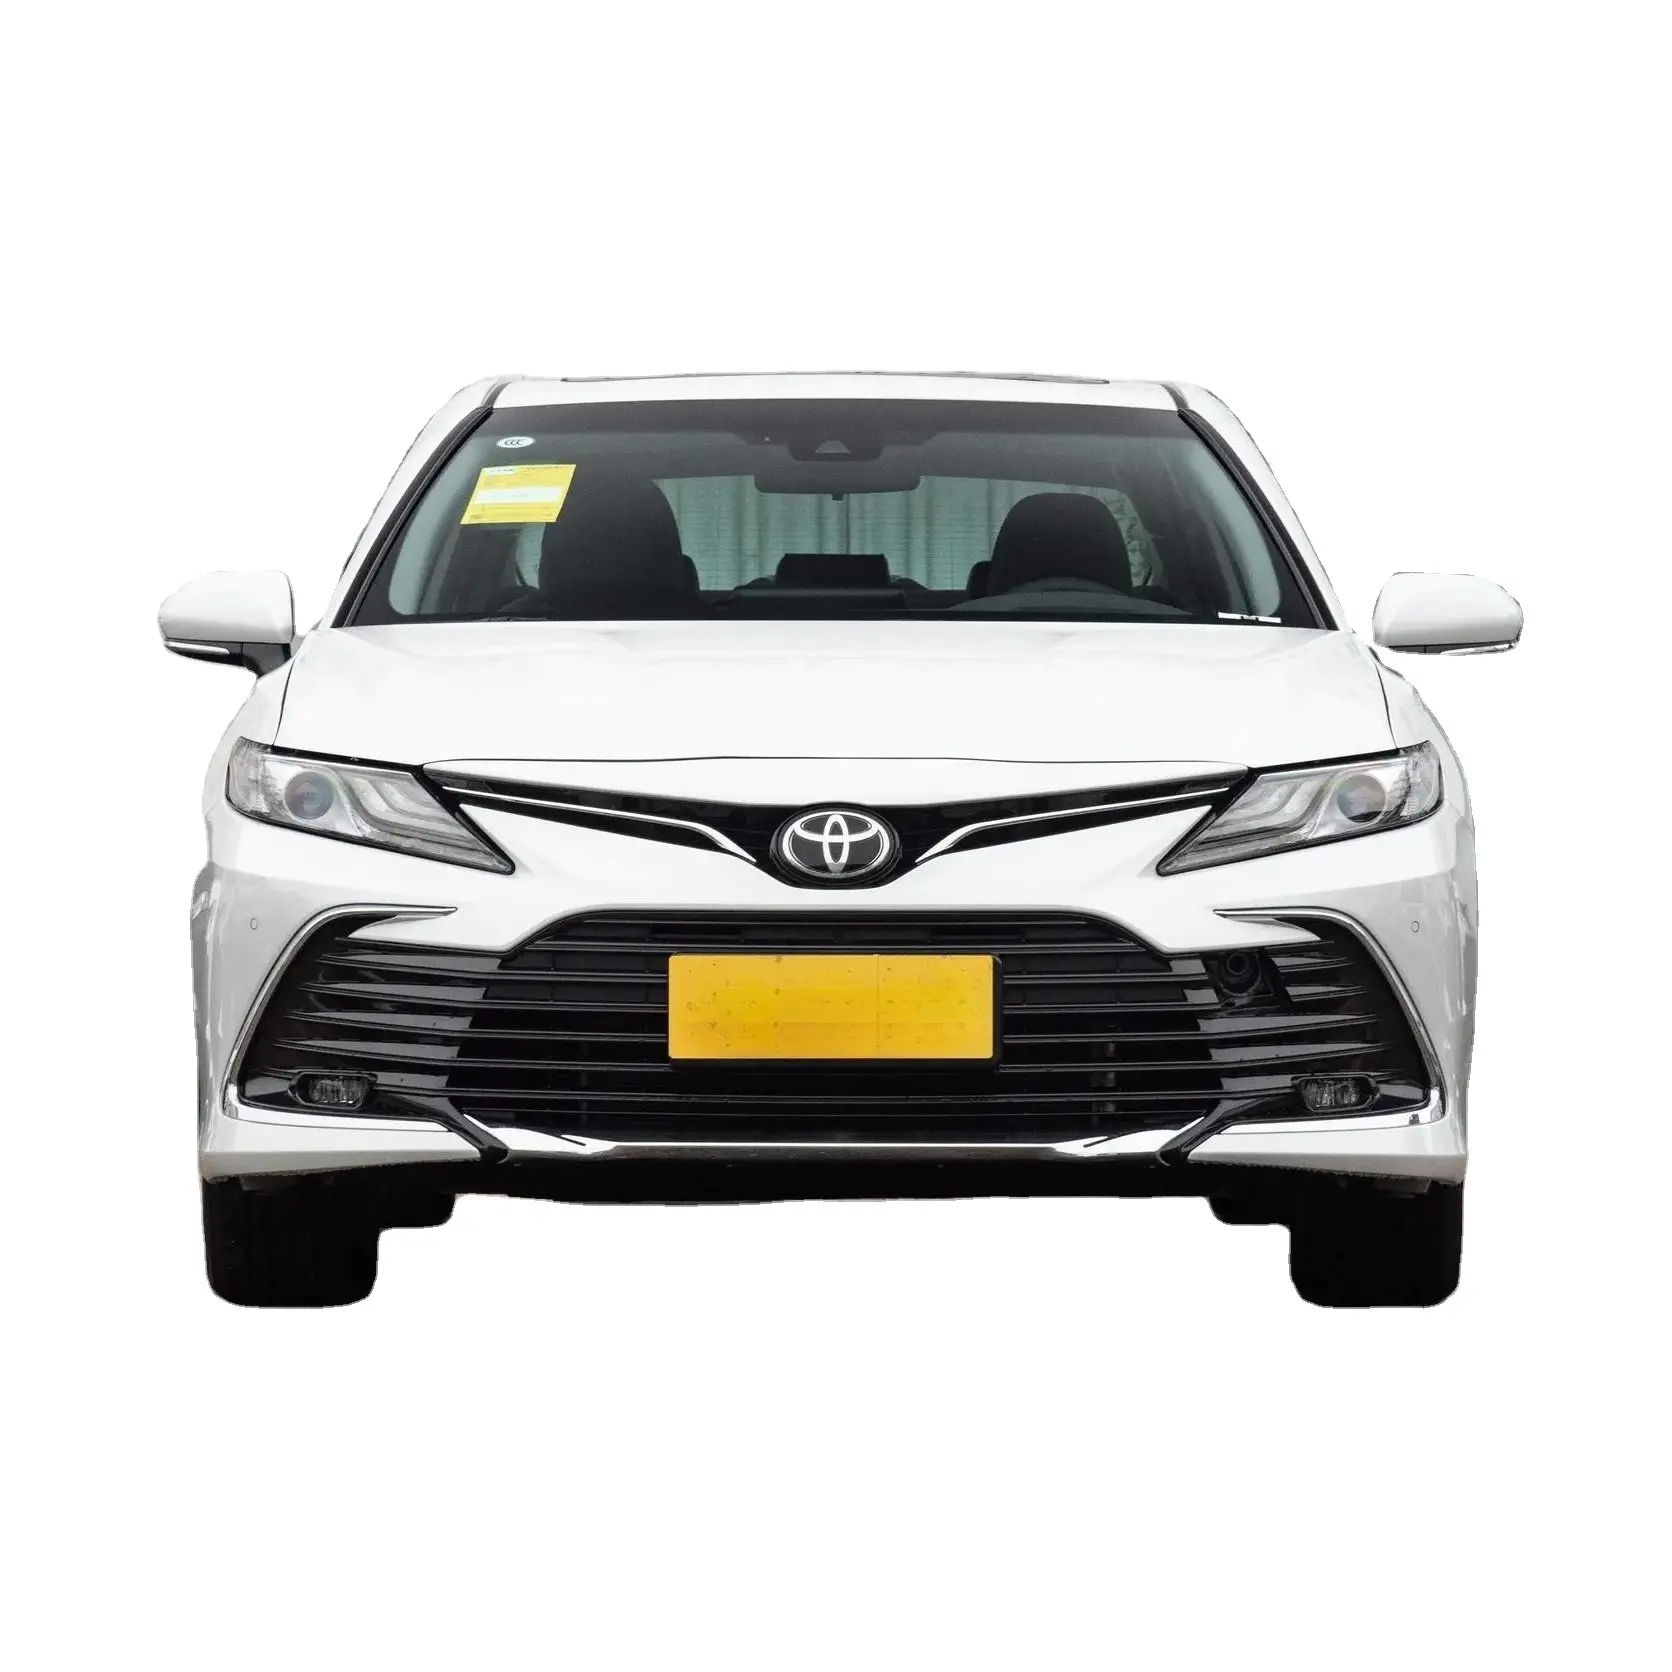 Hot Sale TOYOTA CAMRY sedan cars With Lowest Price High Quality automobiles vehicles made in china